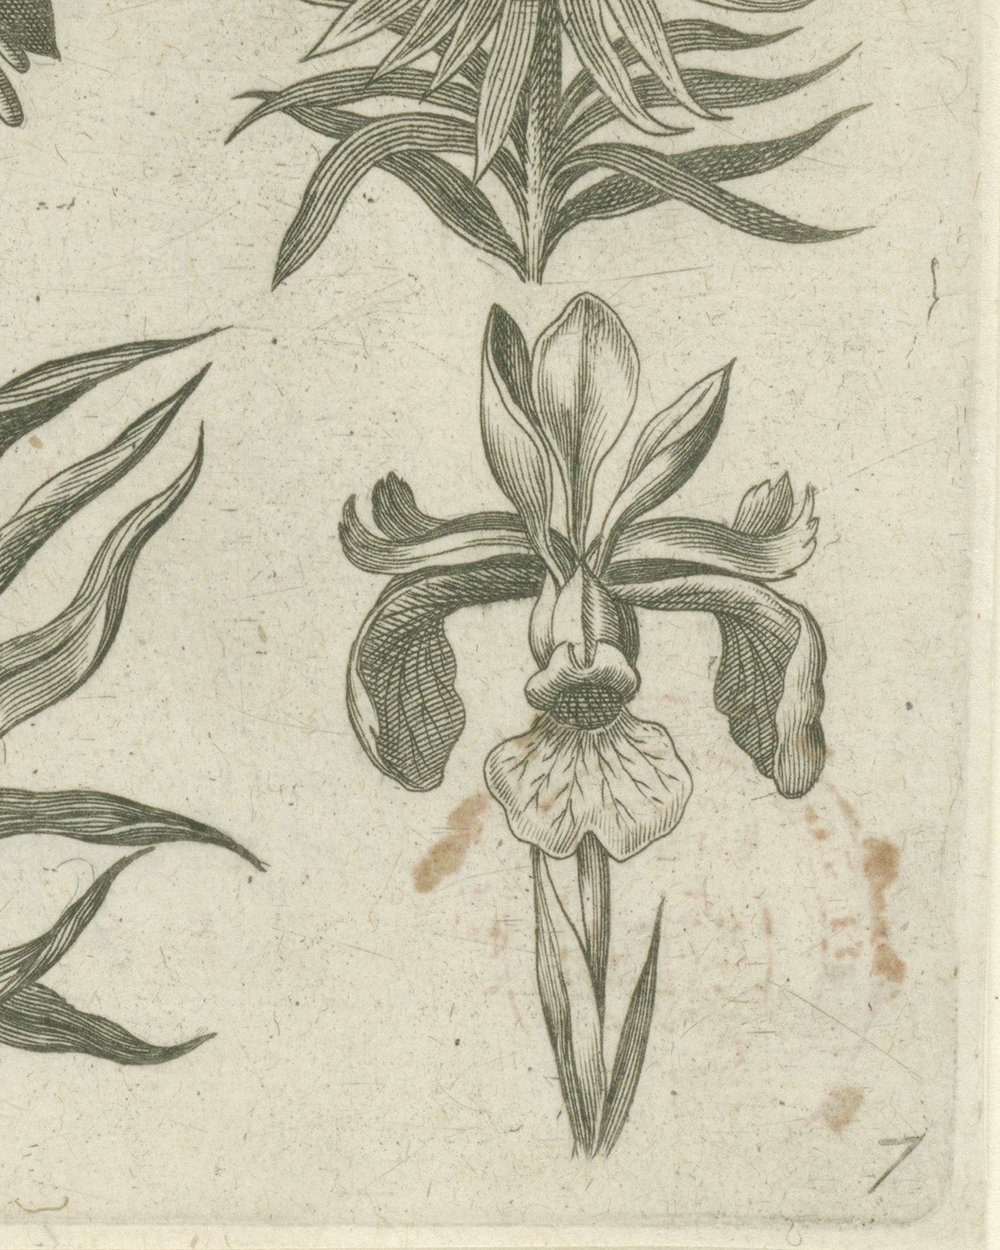 ''Emperor's crown, orchid and lilies of the valley'' (1570 - 1618)